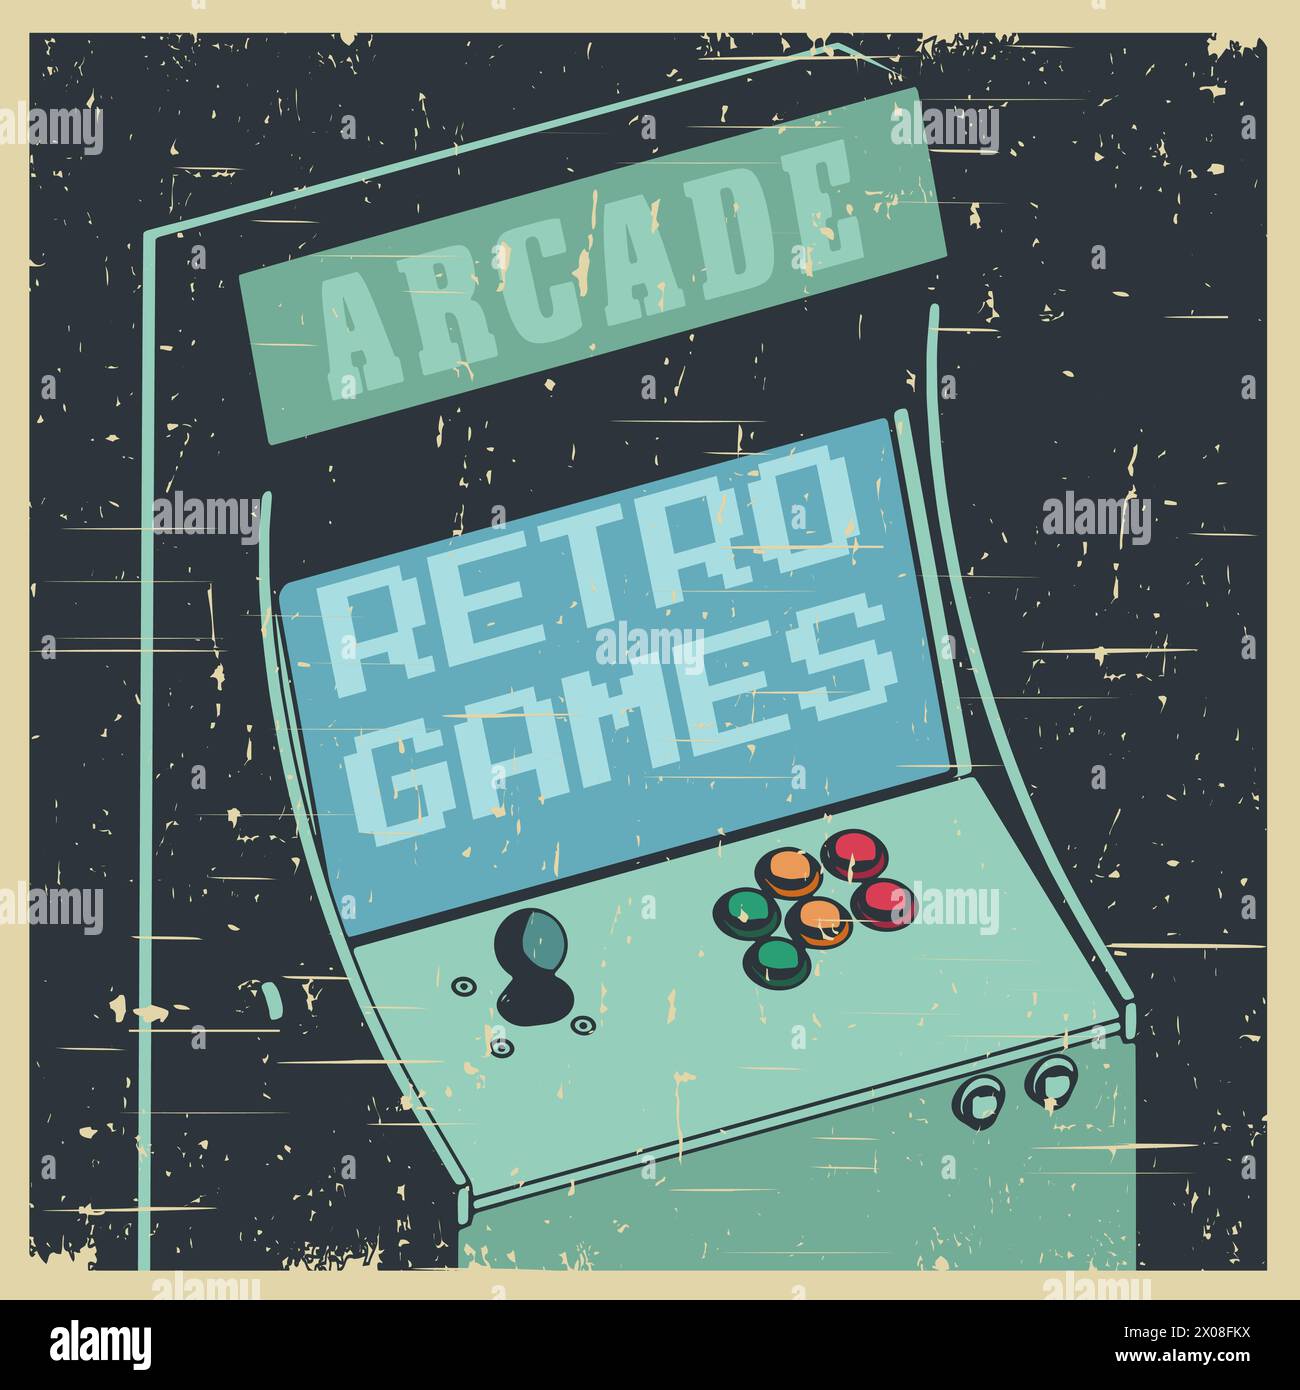 Stylized vector illustration of a retro arcade games cabinet in old poster style Stock Vector